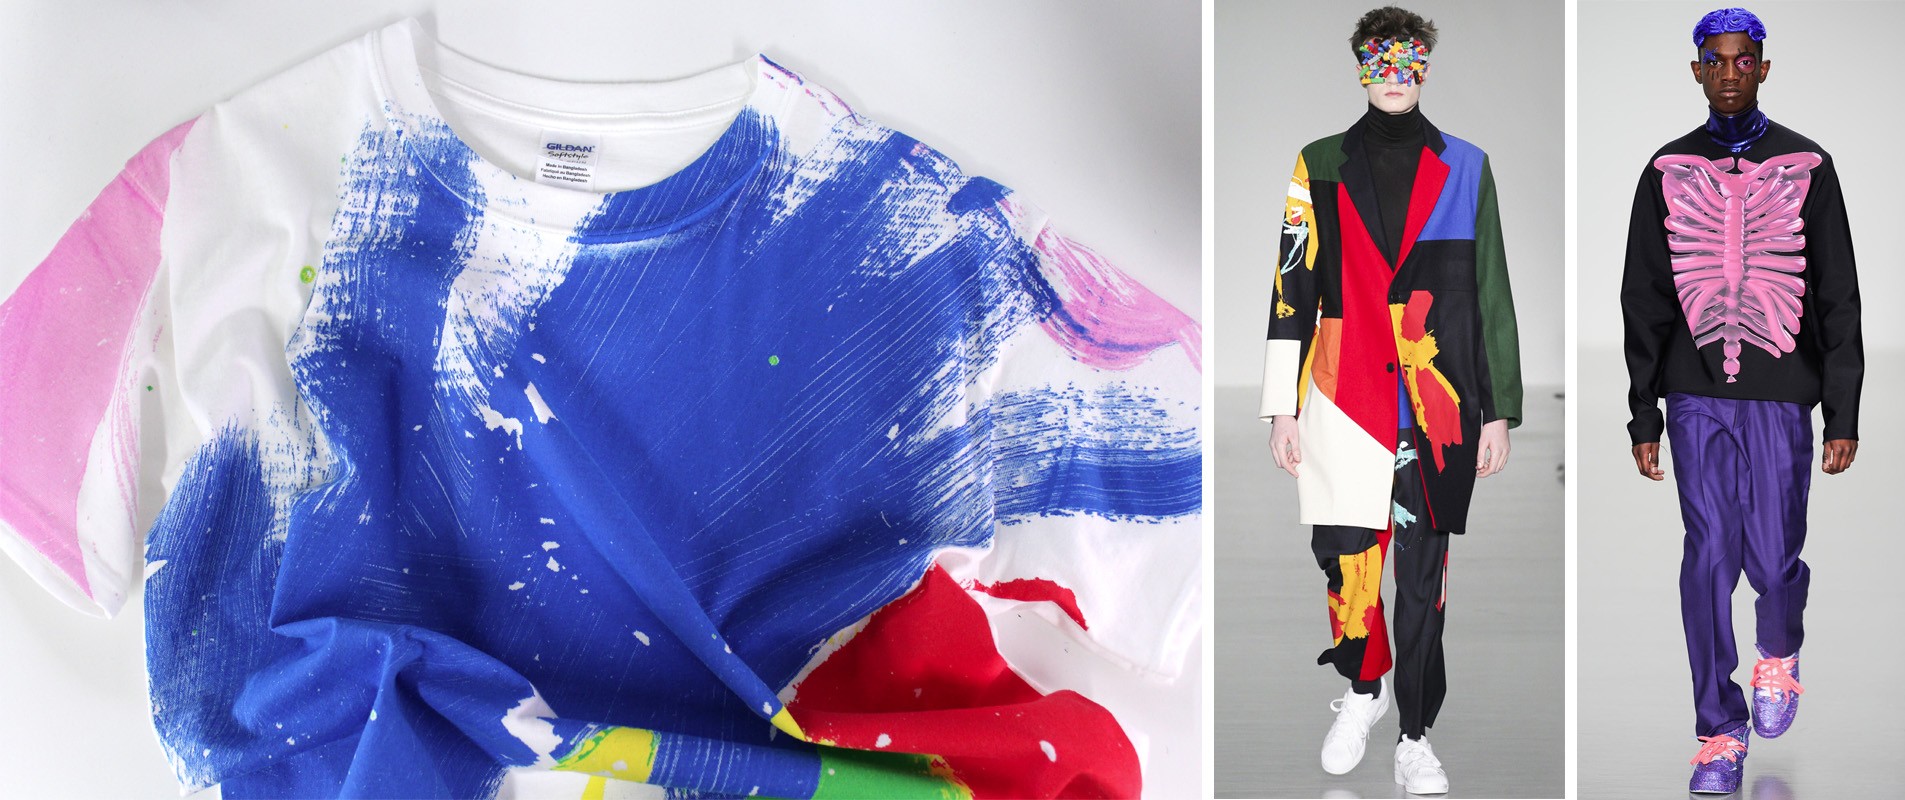 Plastisol screen printed t-shirt and catwalk photos from Agi + Sam and Katy Eary